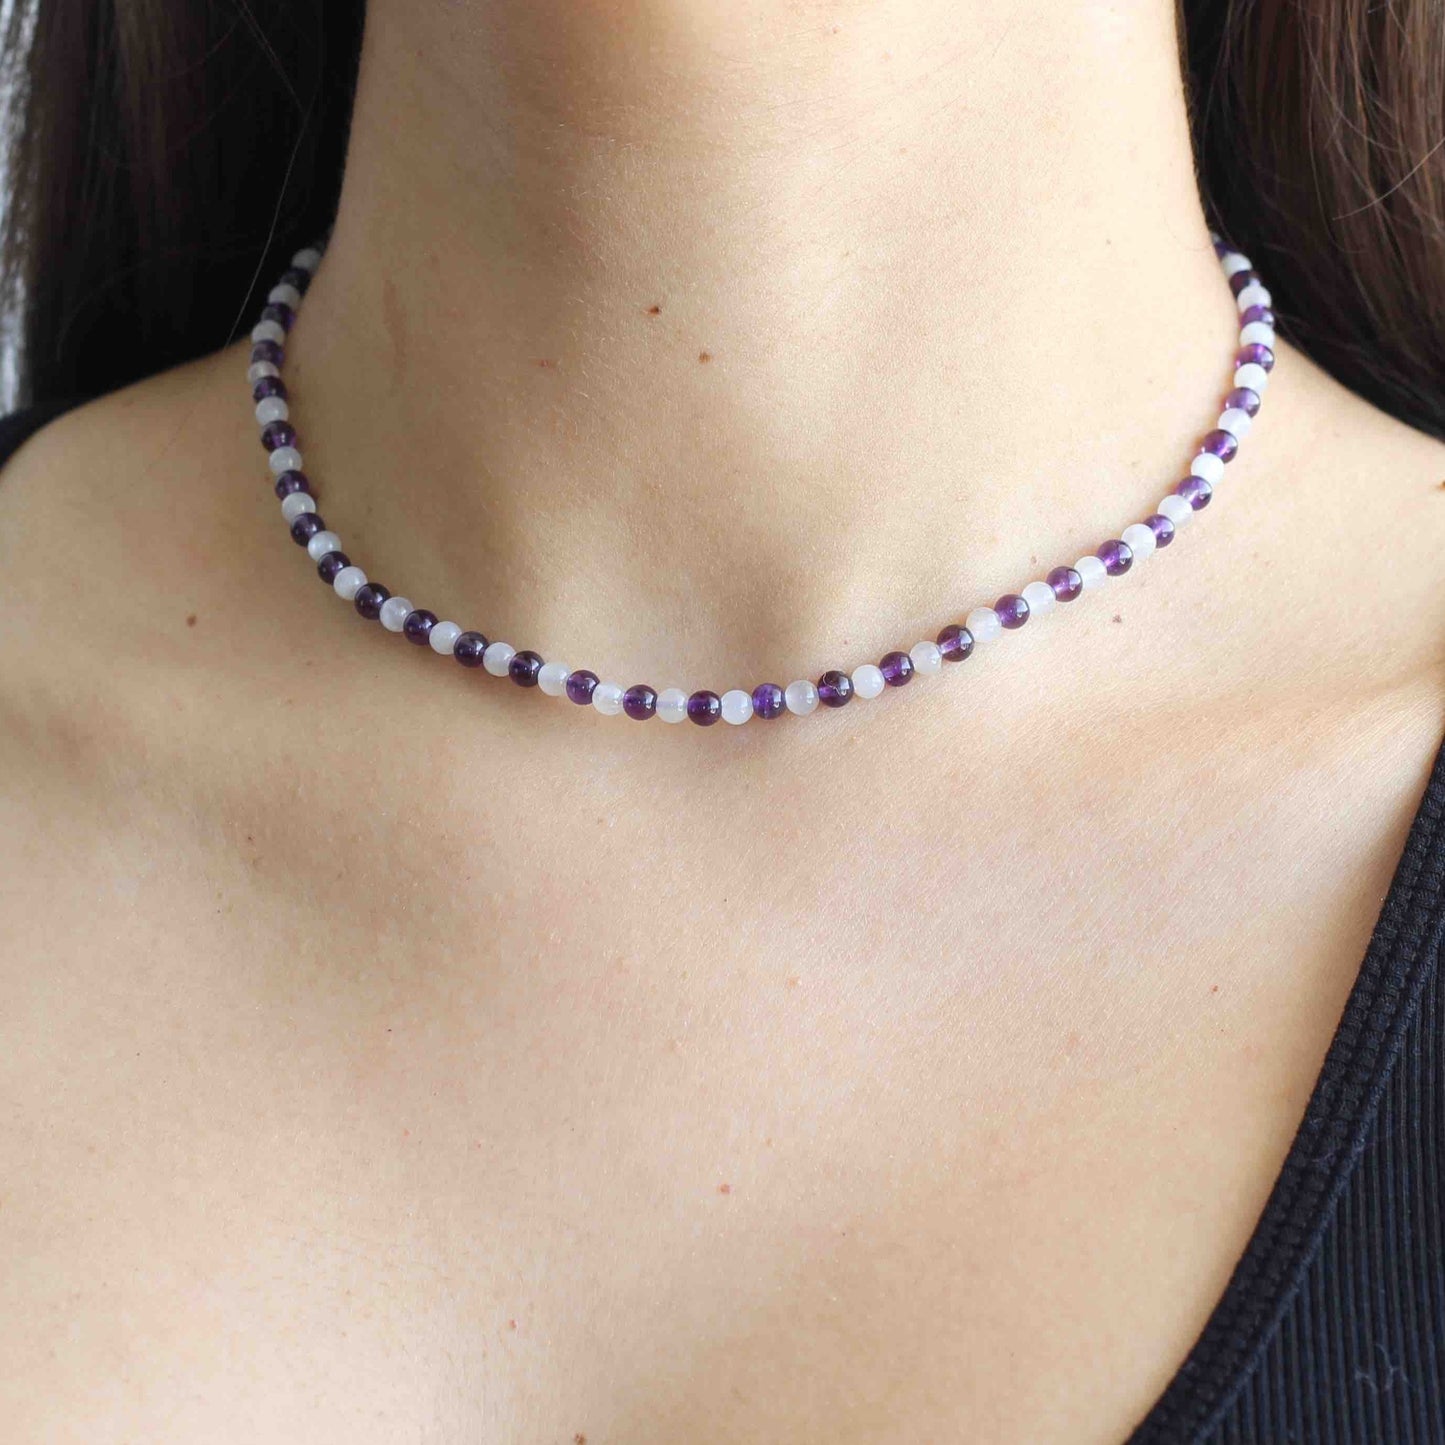 Handmade Minimal Choker Amethyst and White Moonstone Necklace with Custom Made 925 Sterling Silver Closure